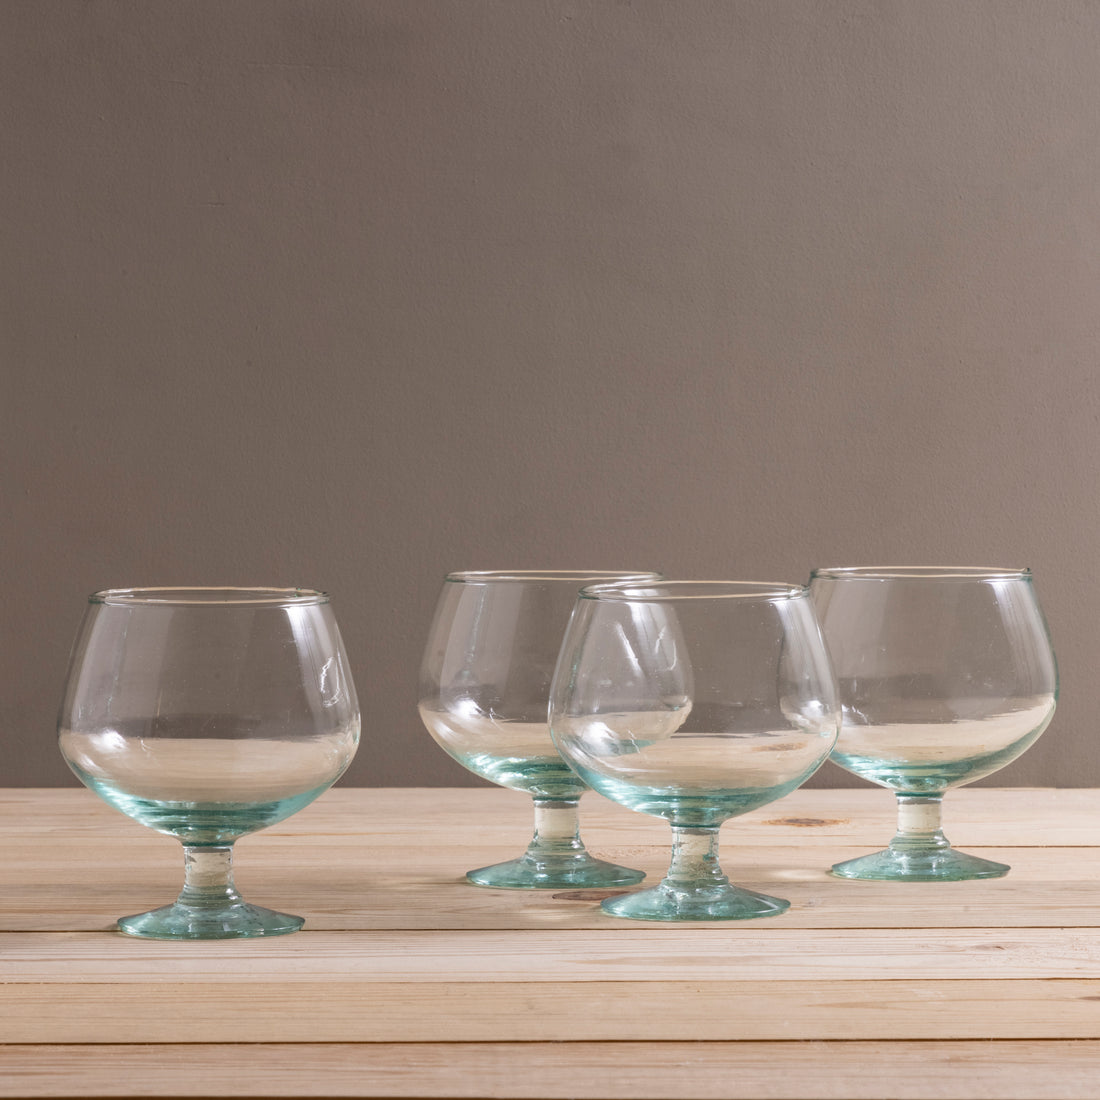 Premium Recycled Goblet, Set of 4